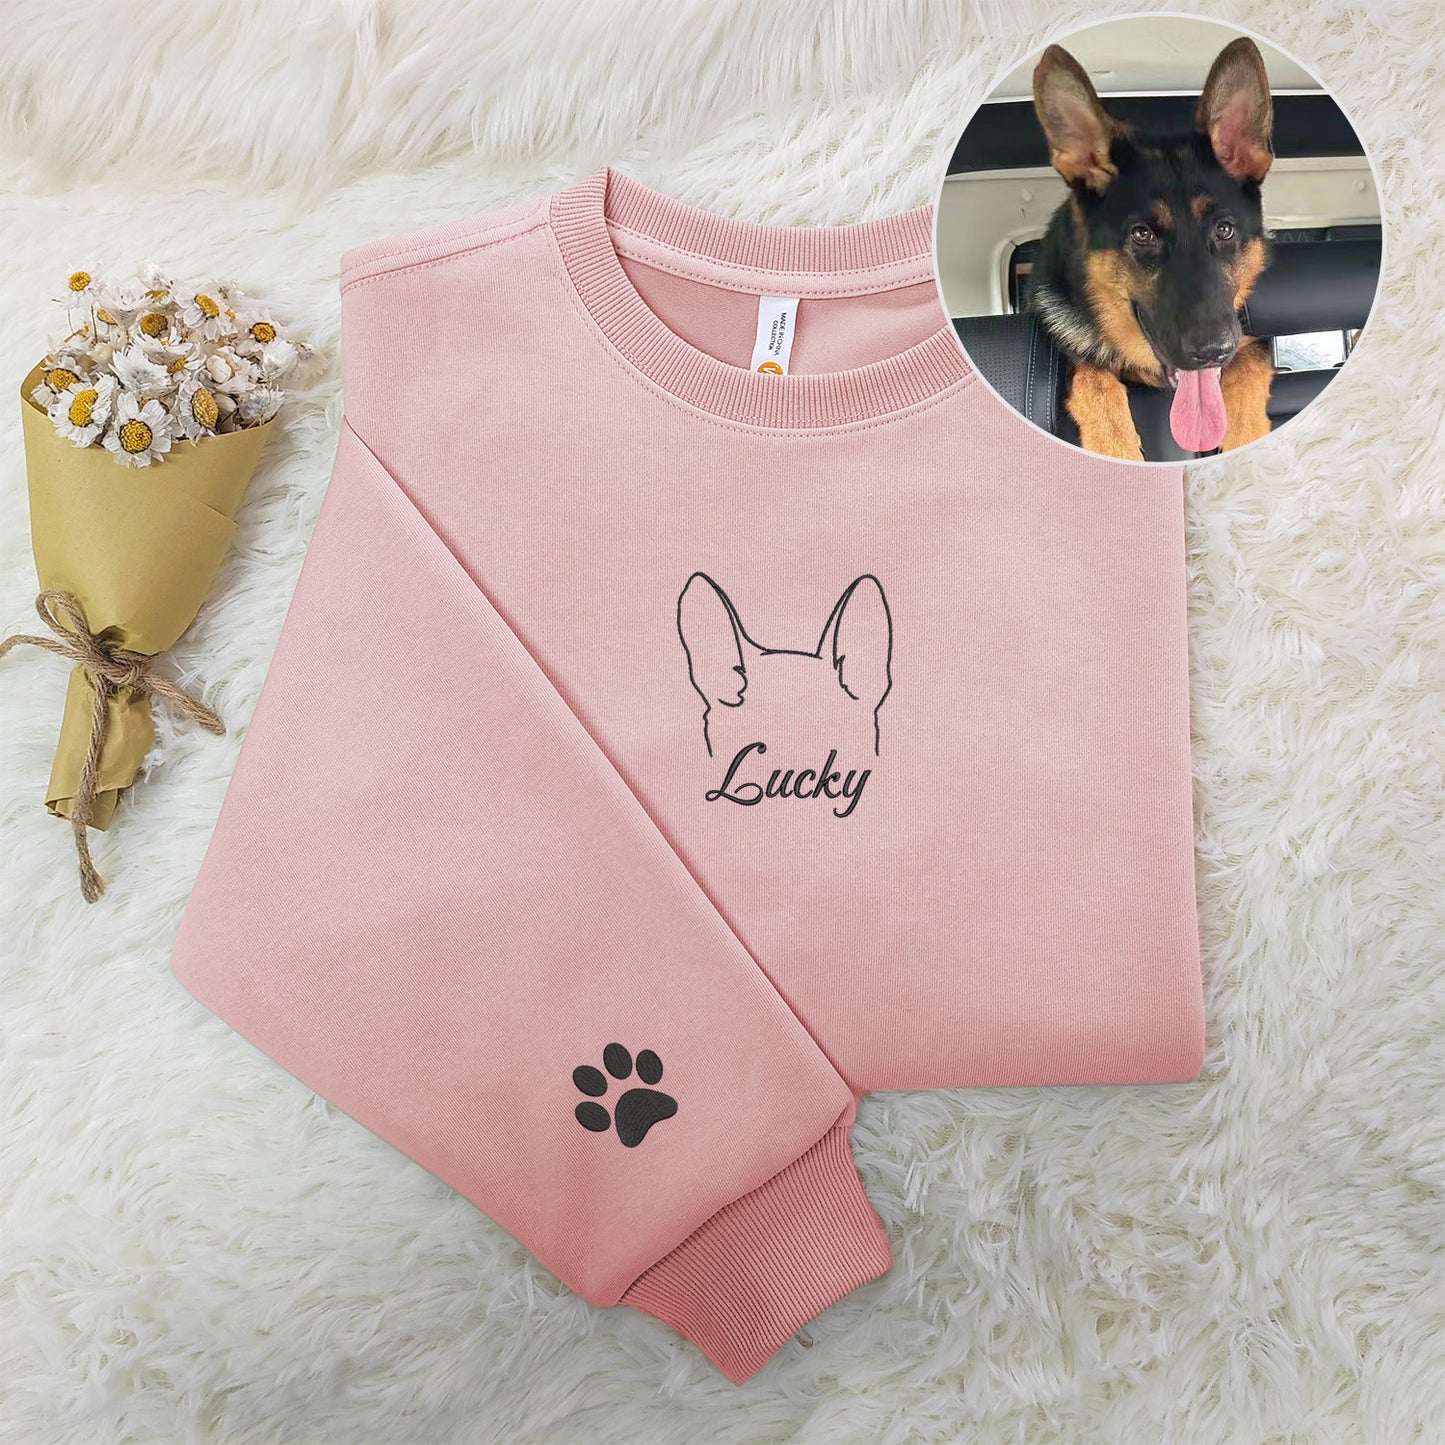 Customized embroidered sweatshirts with puppy pattern, simple lines, full of love